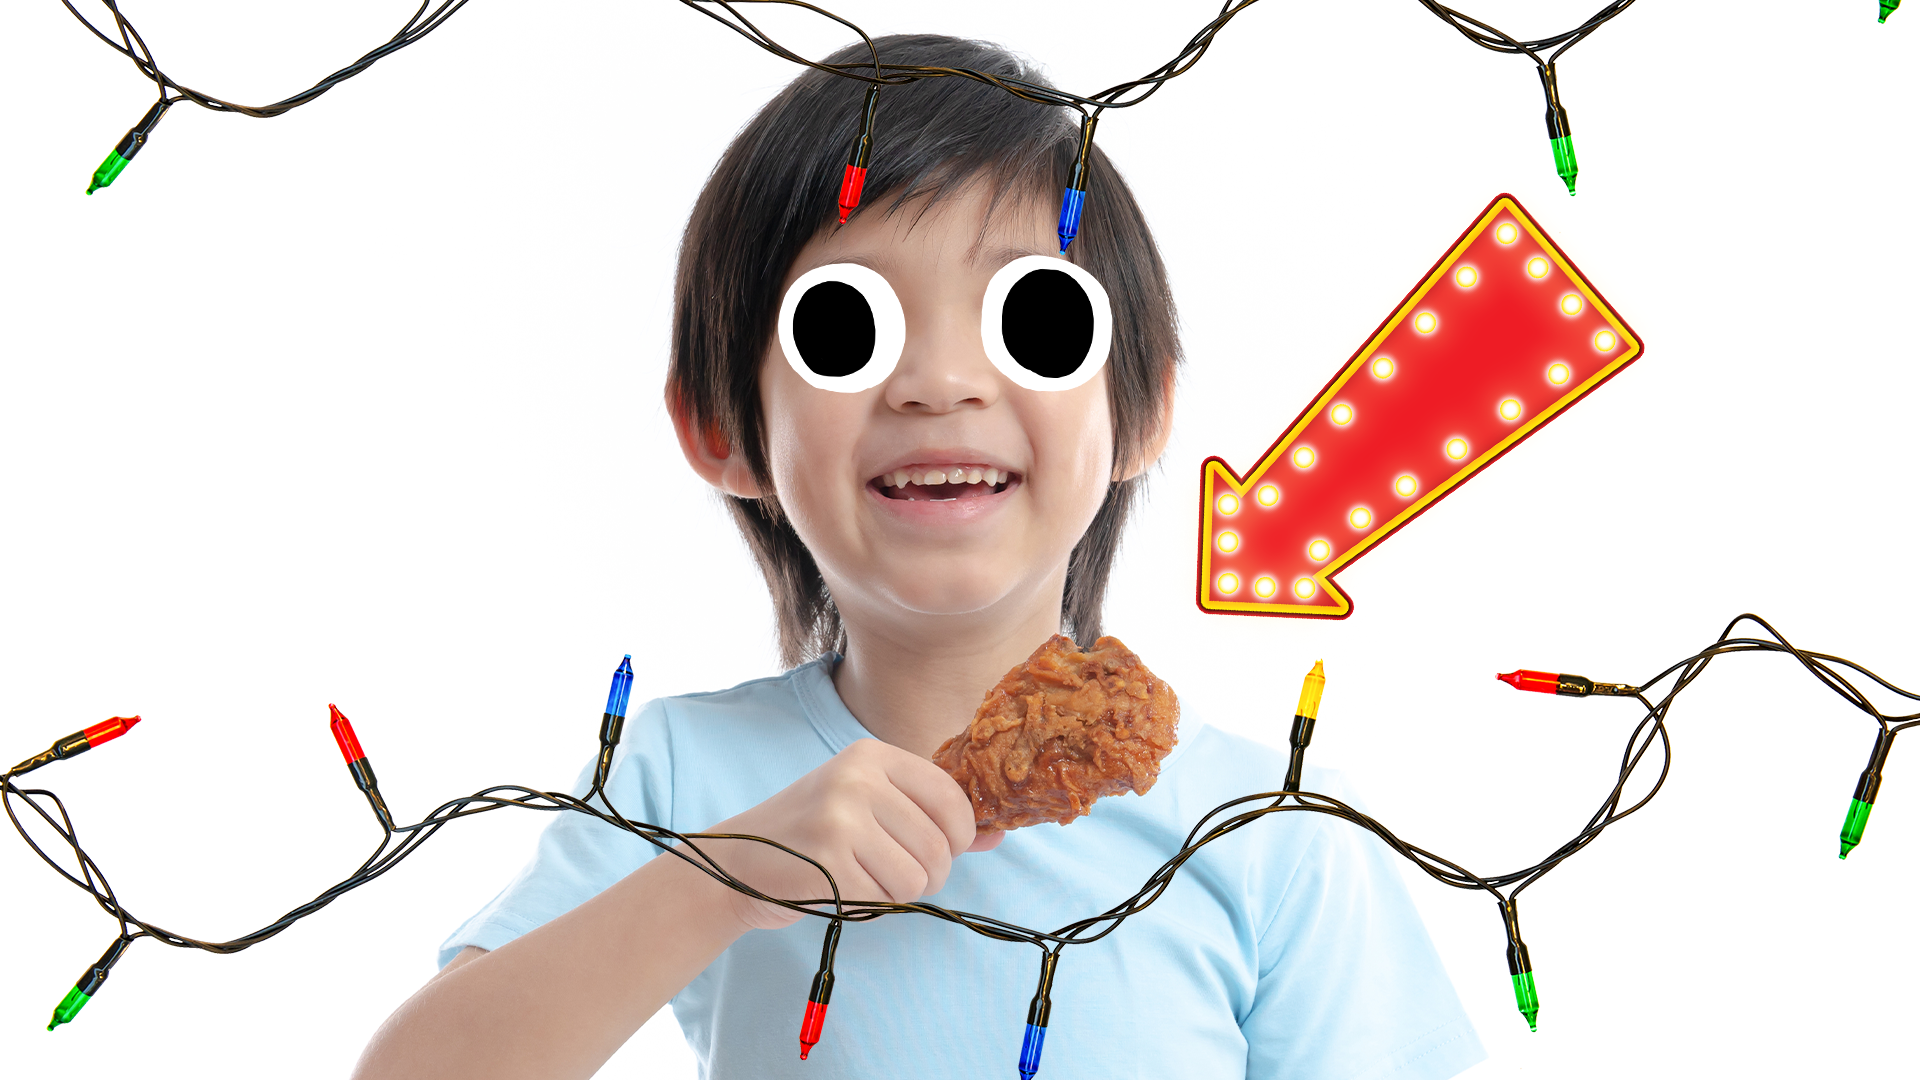 Boy eating chicken with arrow and xmas lights